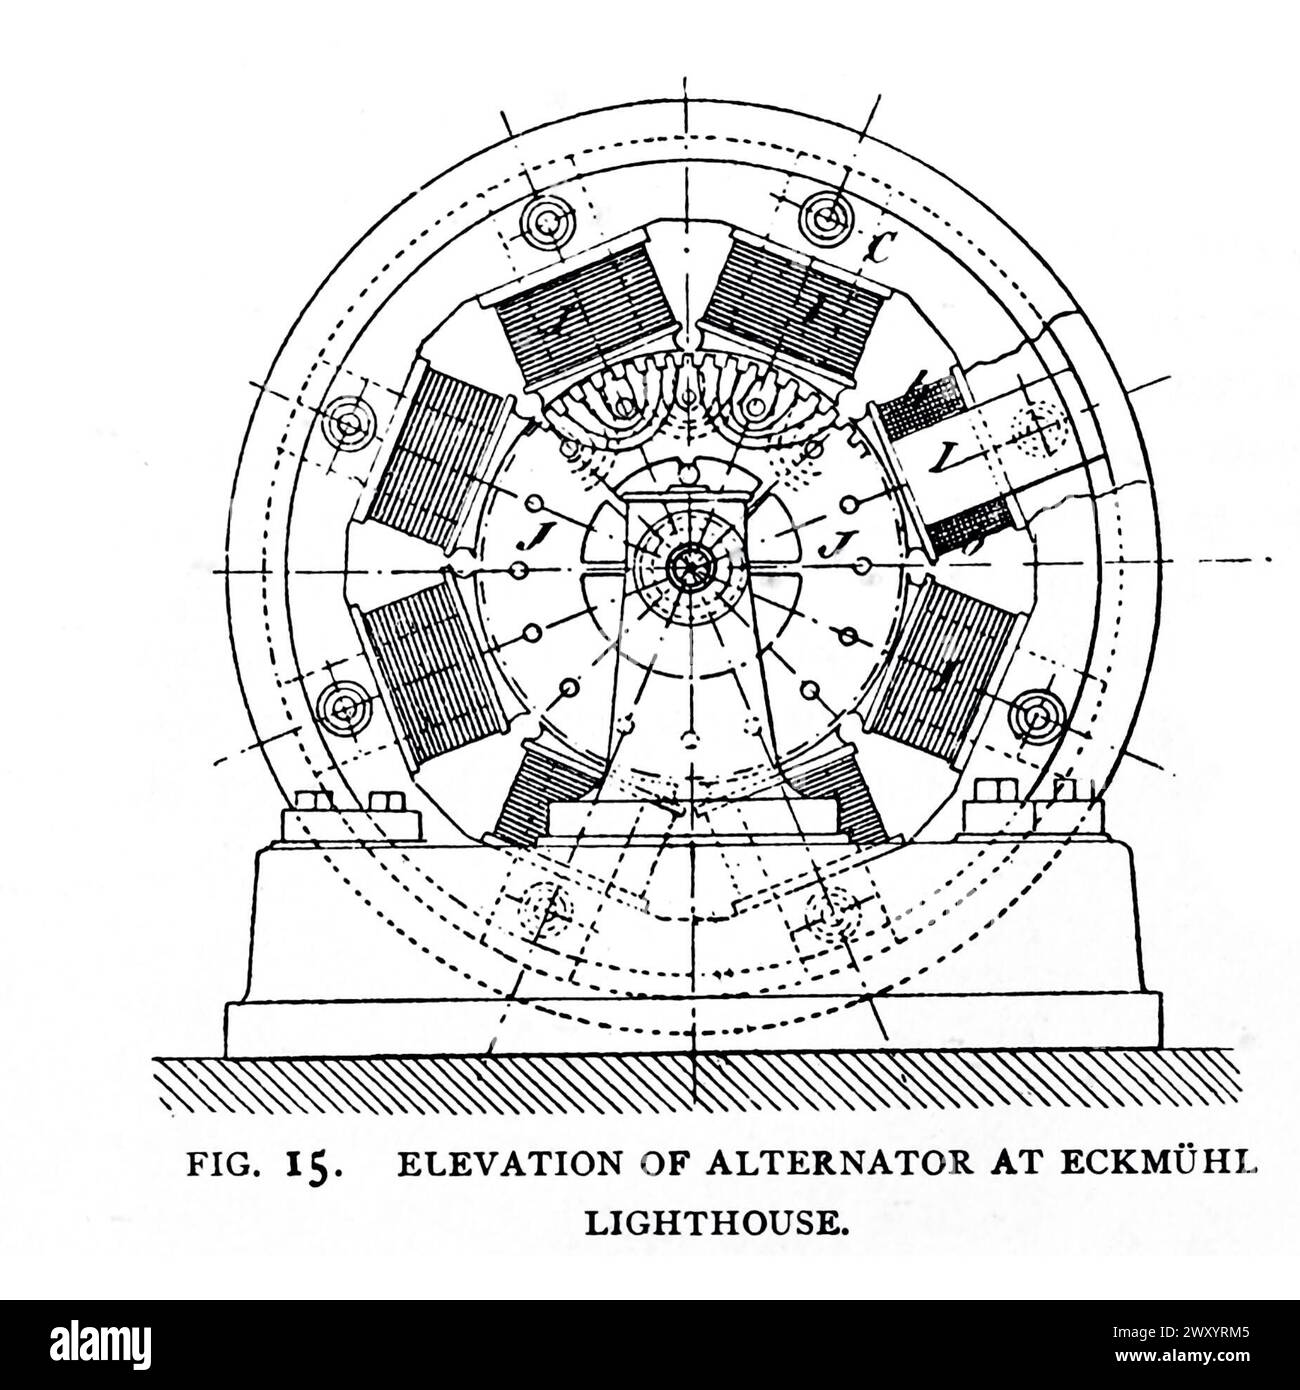 ELEVATION OF ALTERNATOR AT THE ECKMUHL LIGHTHOUSE. from the Article THE LATEST IMPROVEMENTS IN THE FRENCH LIGHTHOUSE SYSTEM. By Jacques Boyer. from The Engineering Magazine Devoted to Industrial Progress Volume XVI October 1898 - March 1899 The Engineering Magazine Co Stock Photo